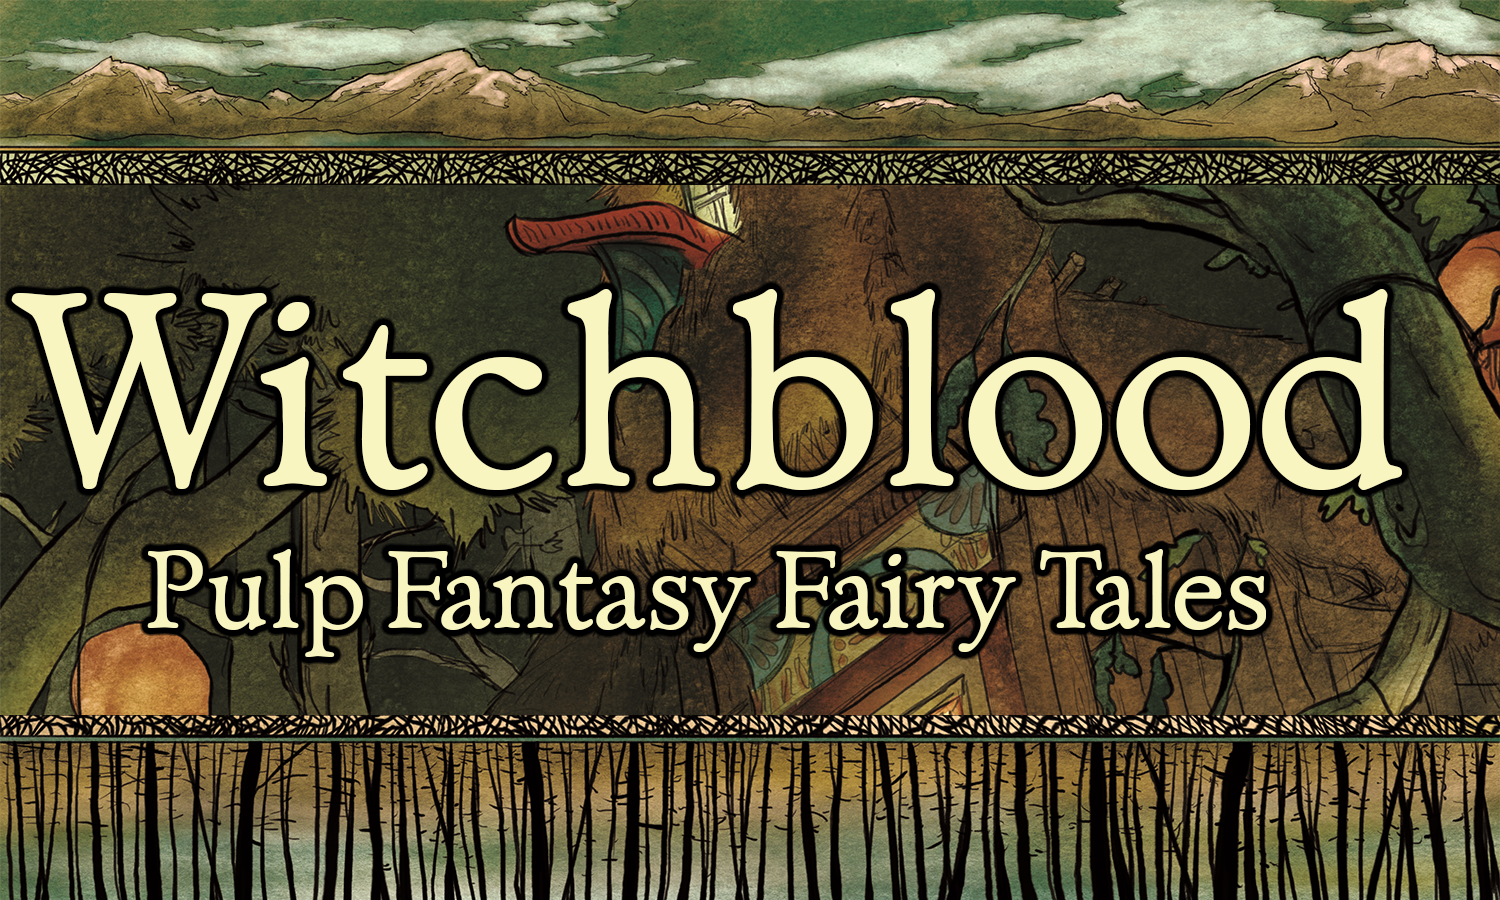 Witchblood: A Game of Pulp Fantasy Fairy Tales